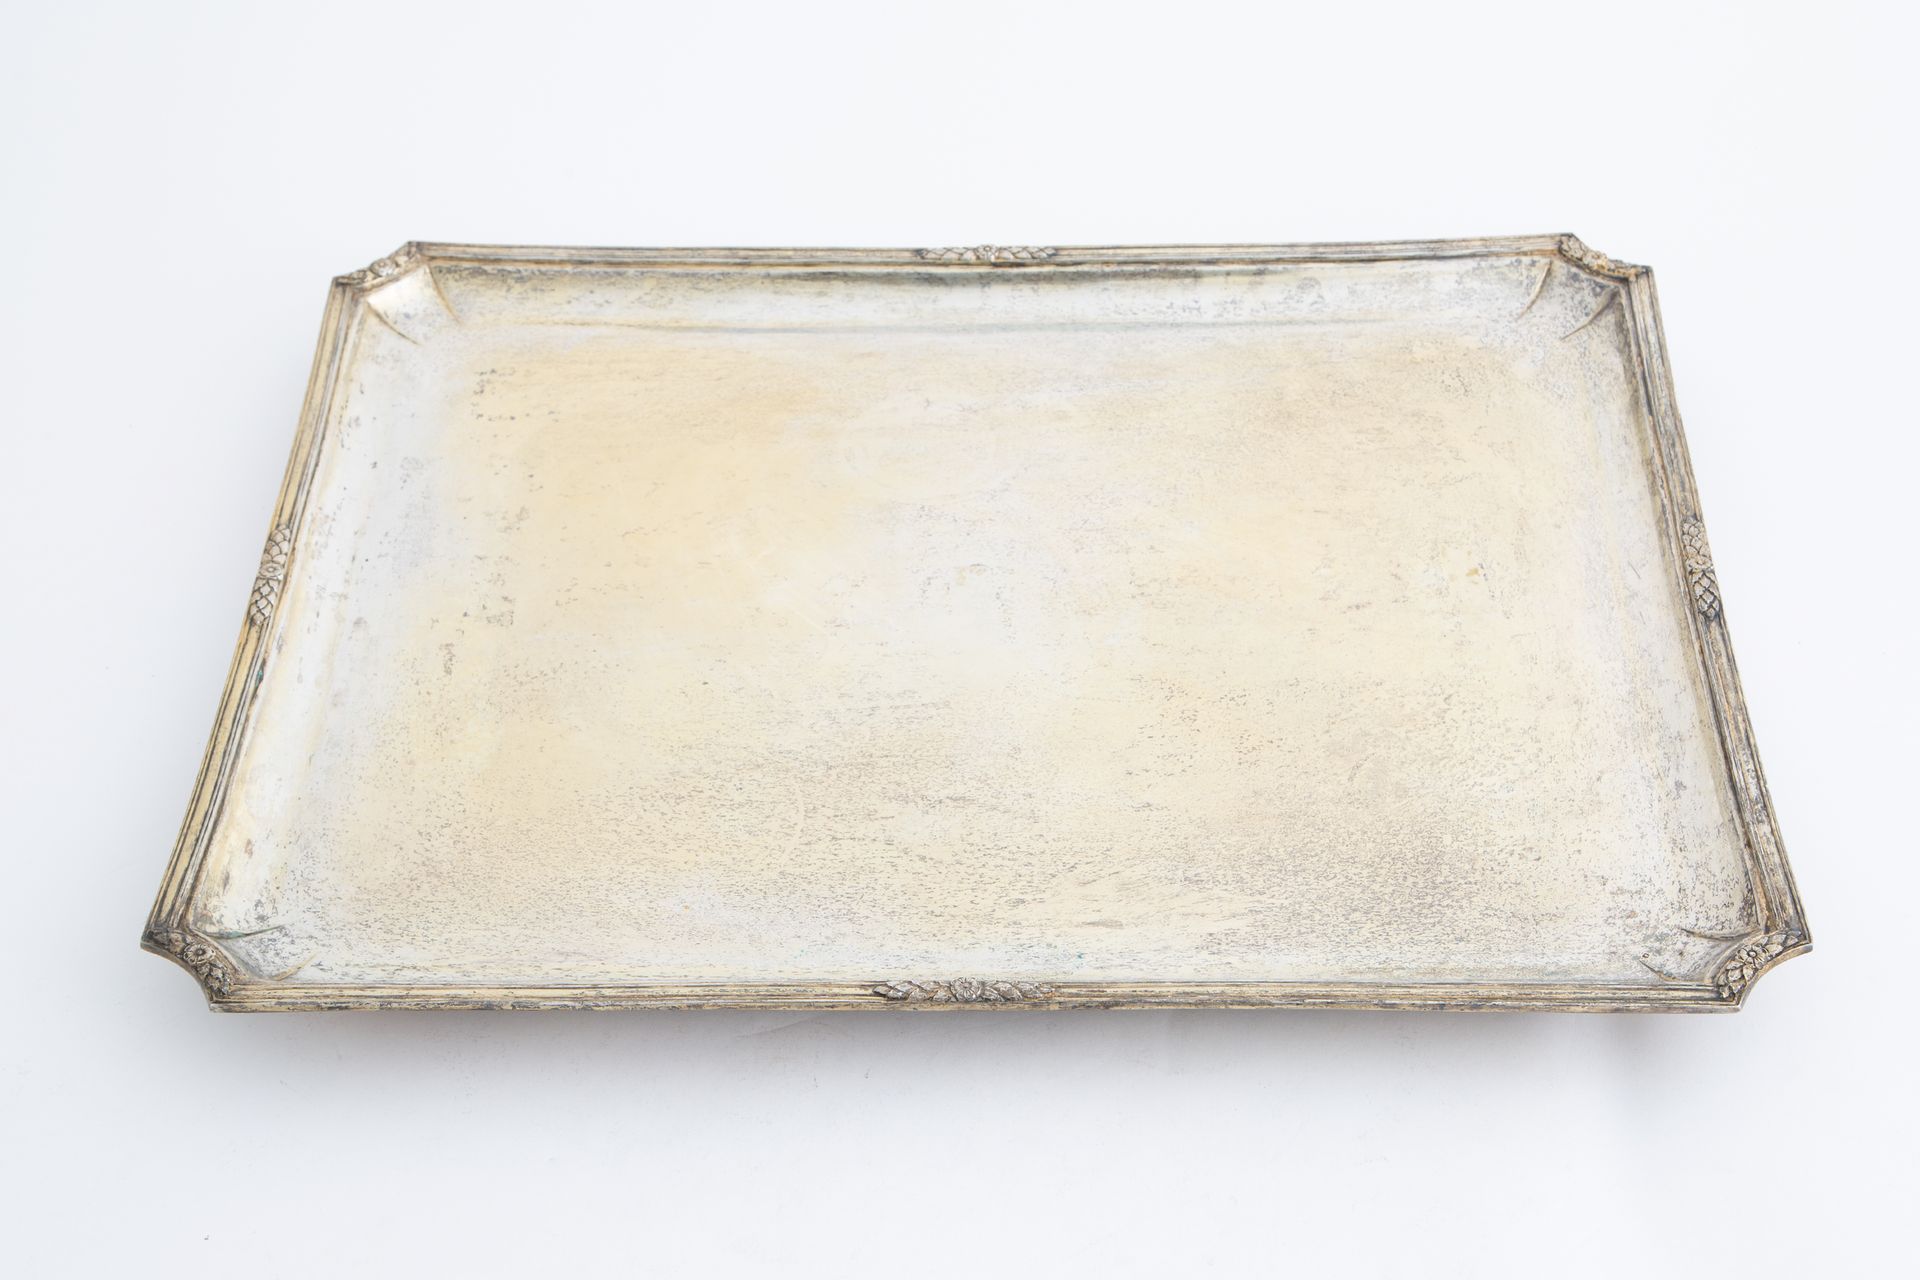 Silver tray, gr. 2740 ca. Early 20th century Plateau rectangulaire en argent ave&hellip;